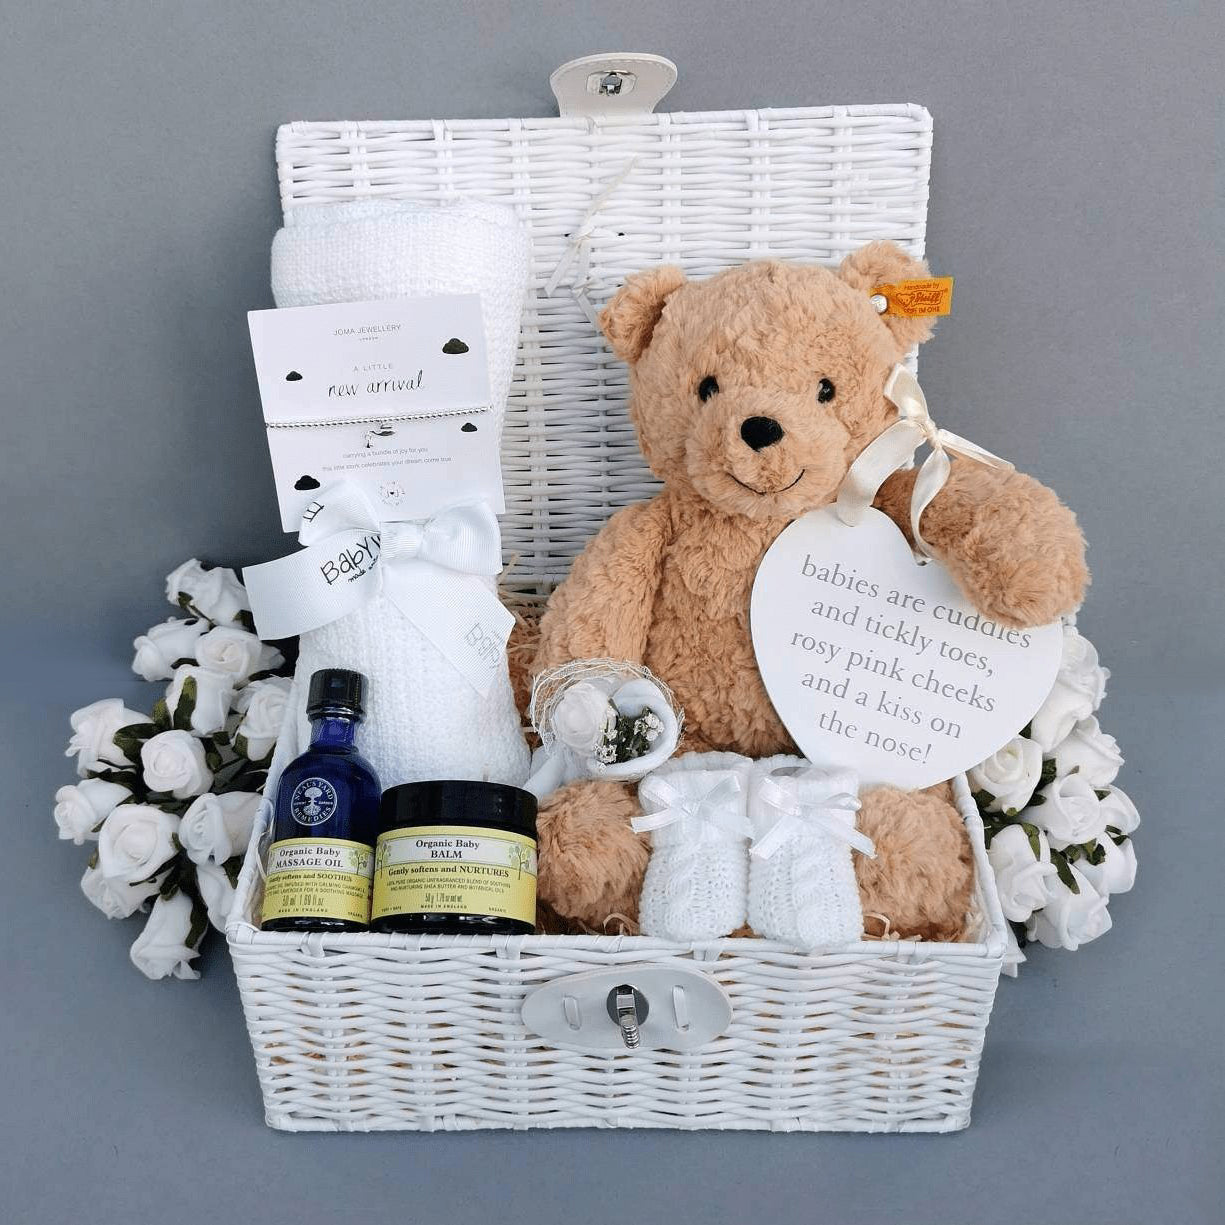 Gifts for New Moms, Chicago life and style